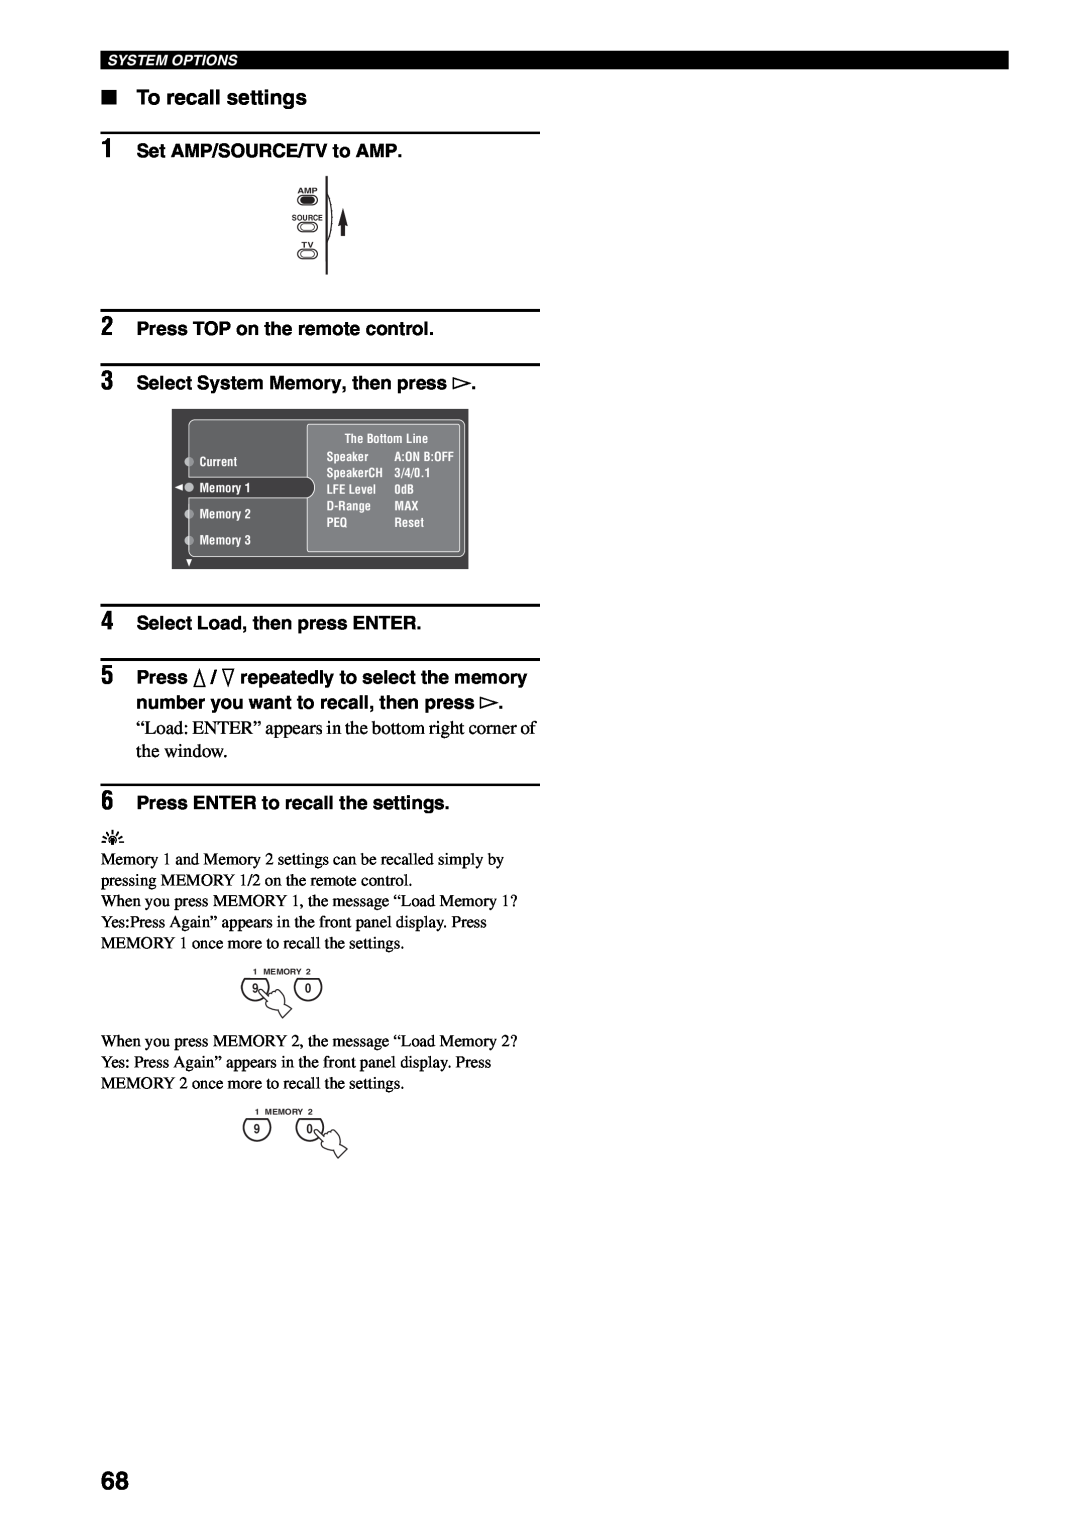 Yamaha RX-V2500 owner manual To recall settings, 4Select Load, then press ENTER, 6Press ENTER to recall the settings 